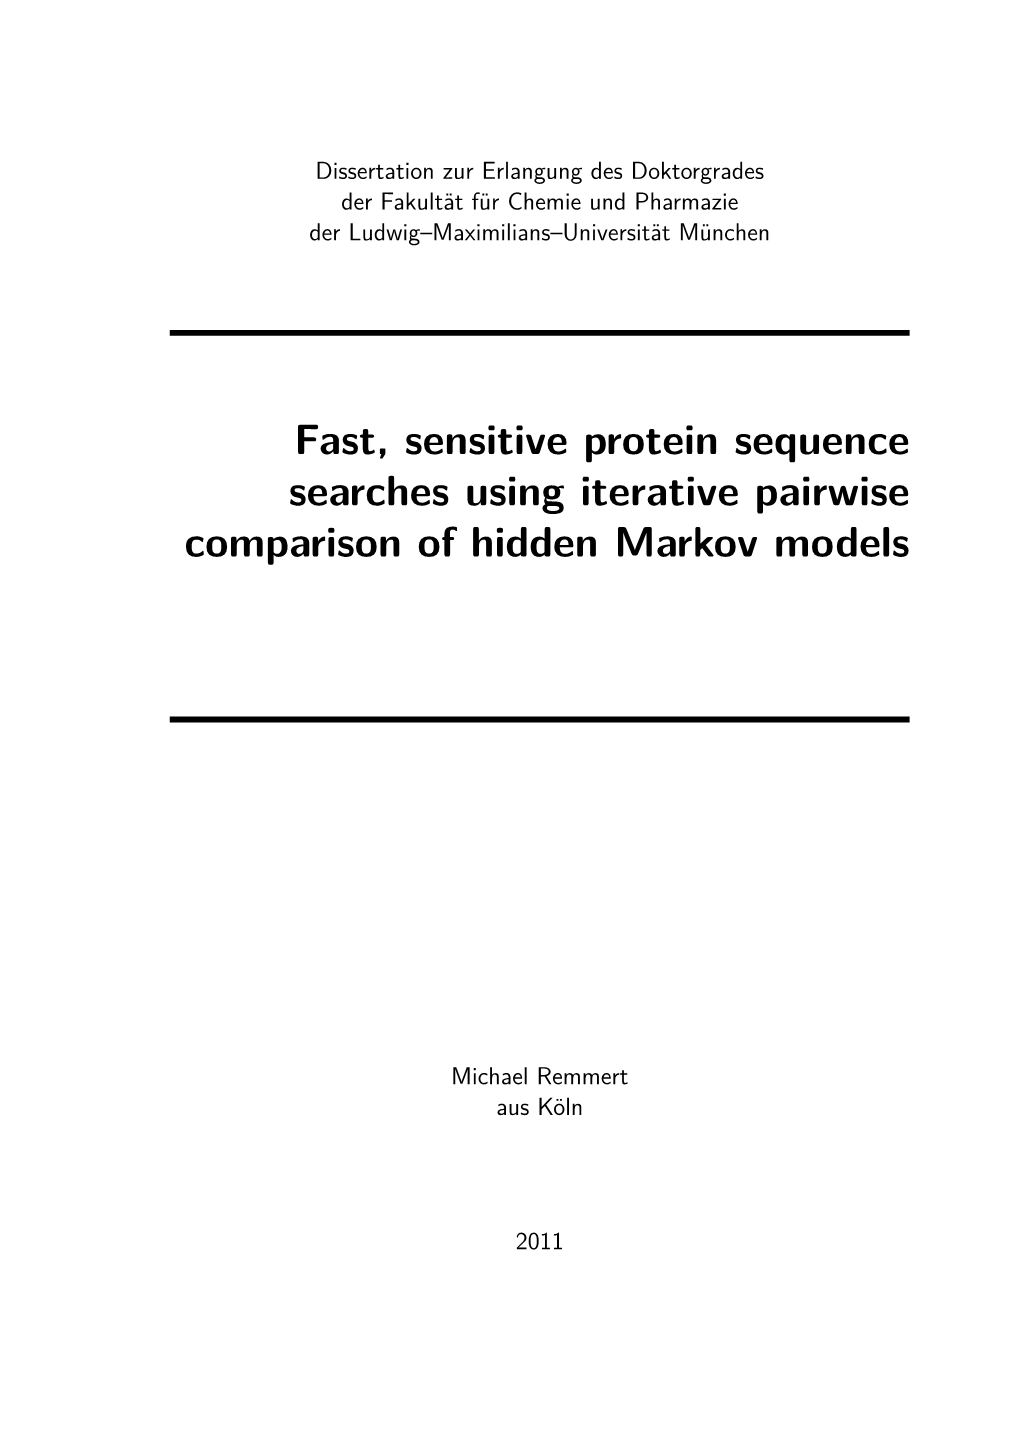 Fast, Sensitive Protein Sequence Searches Using Iterative Pairwise Comparison of Hidden Markov Models